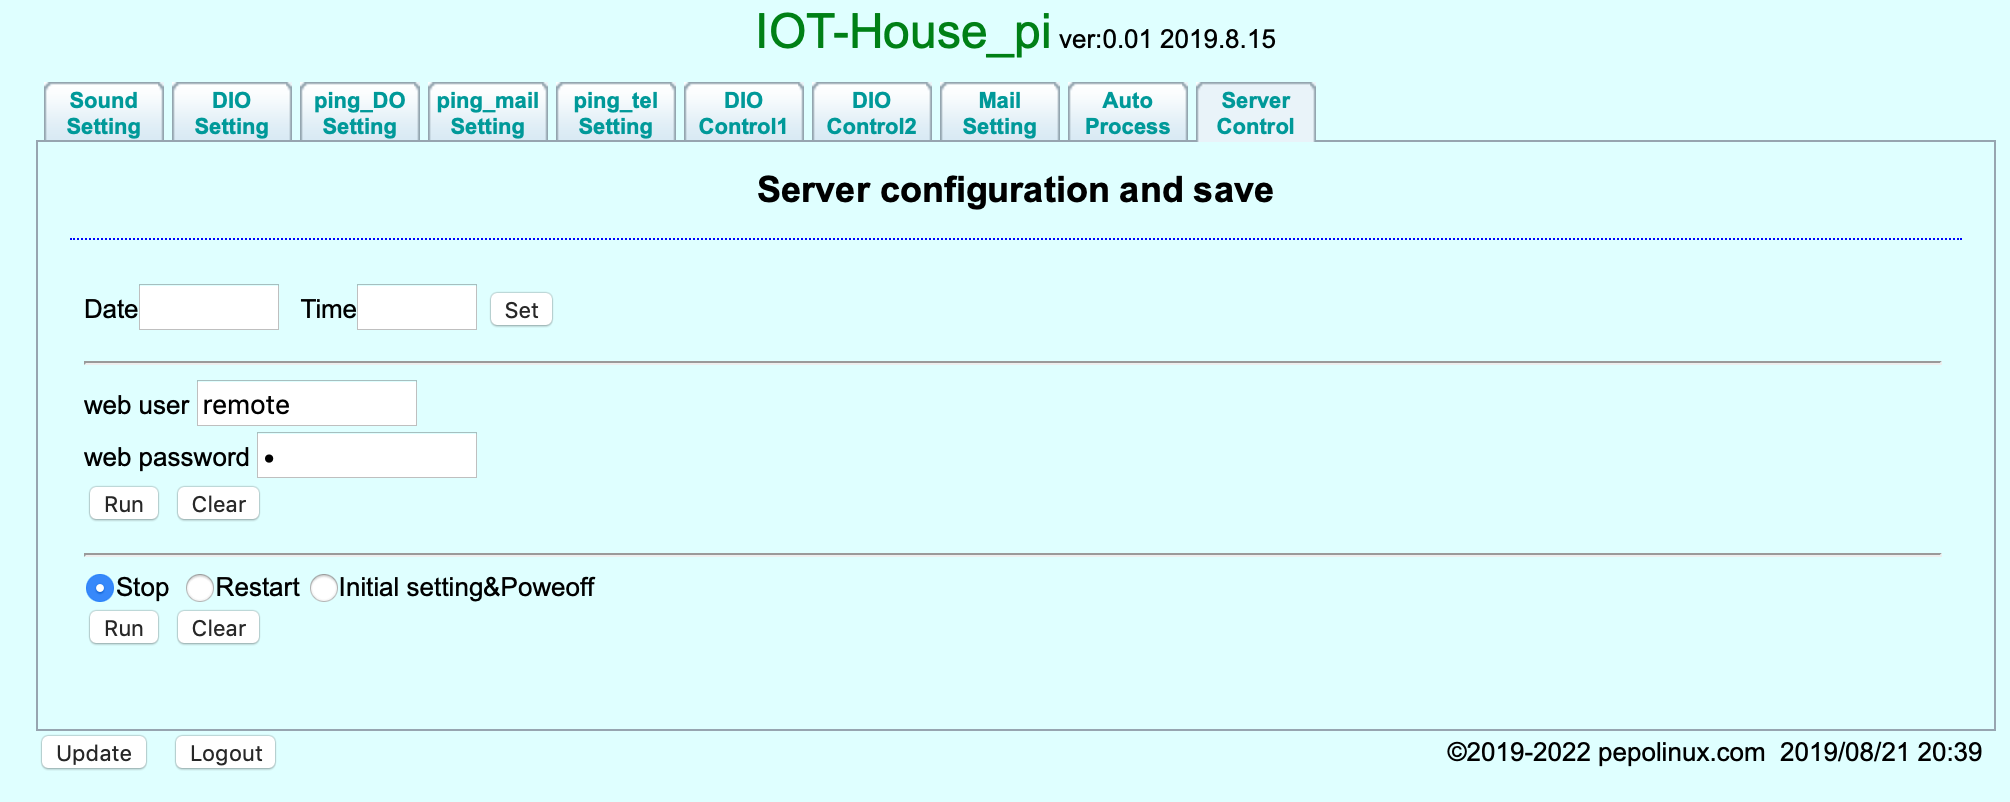 iot-house_server_conf.png